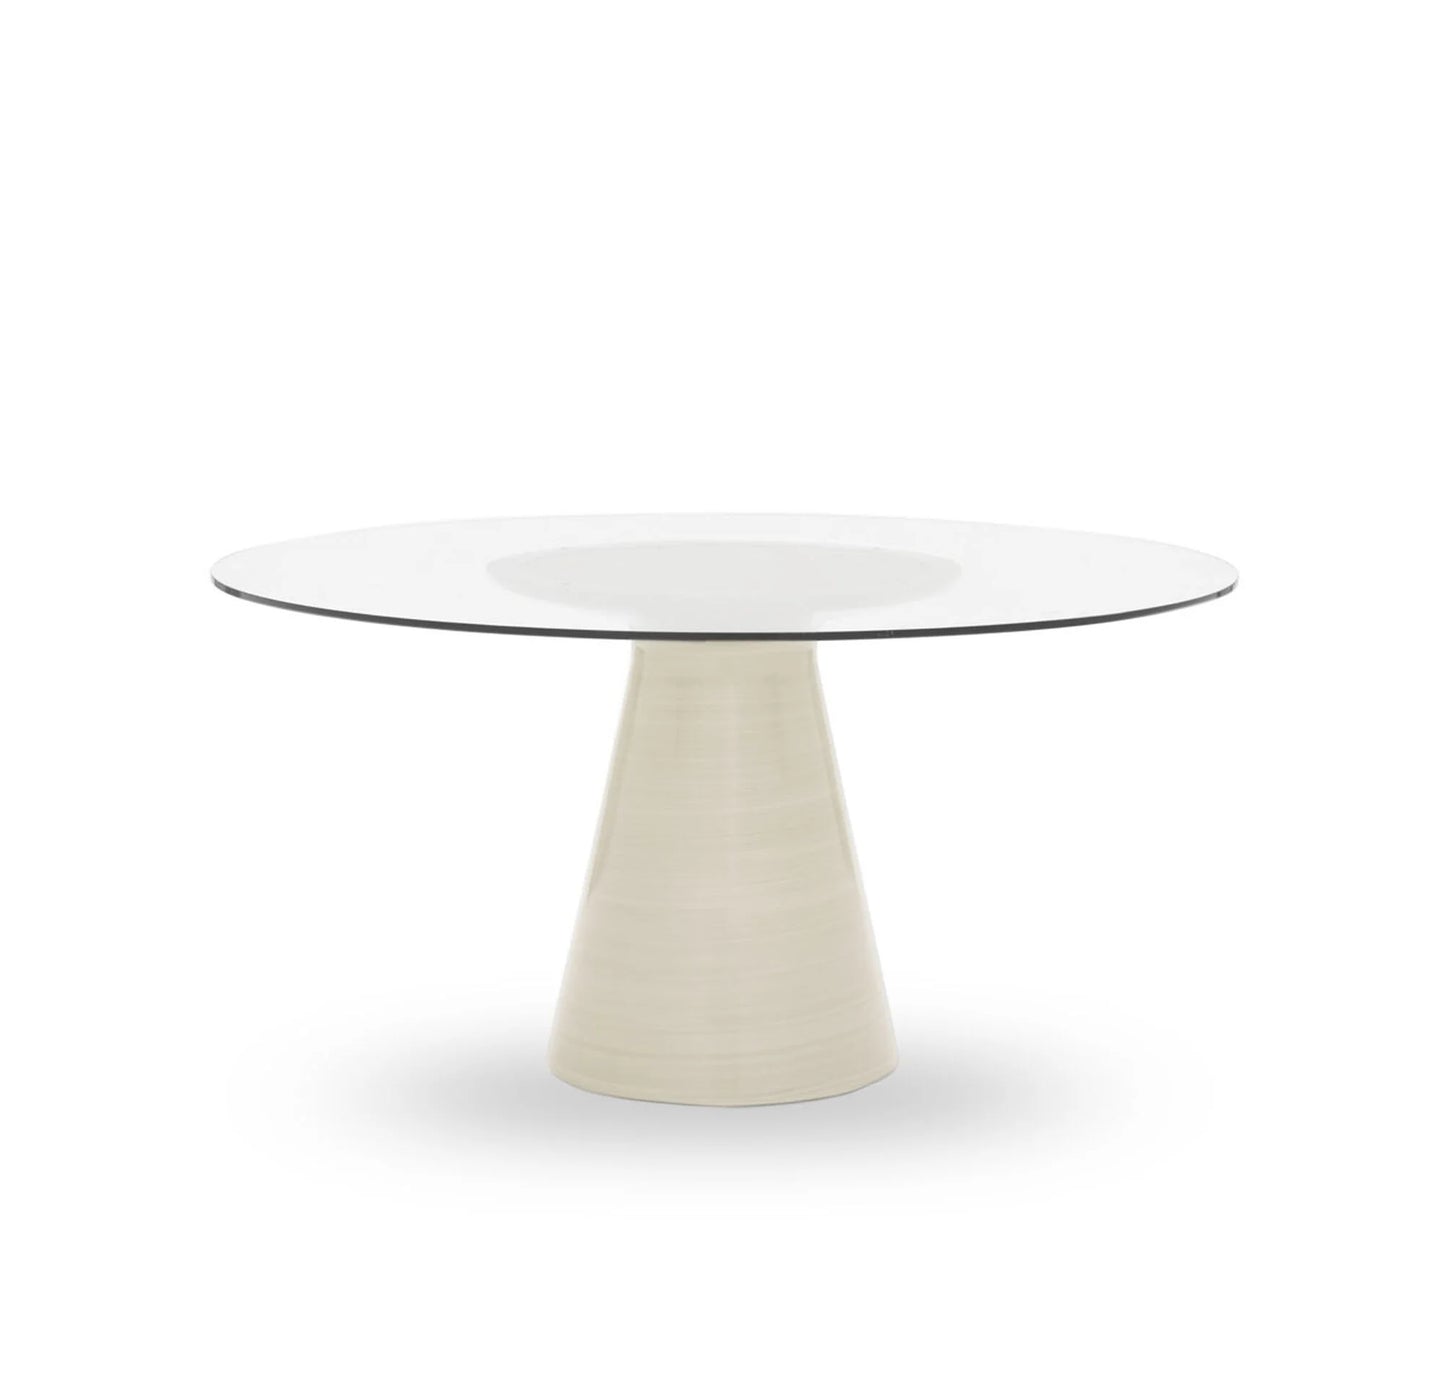 Addie Dining table